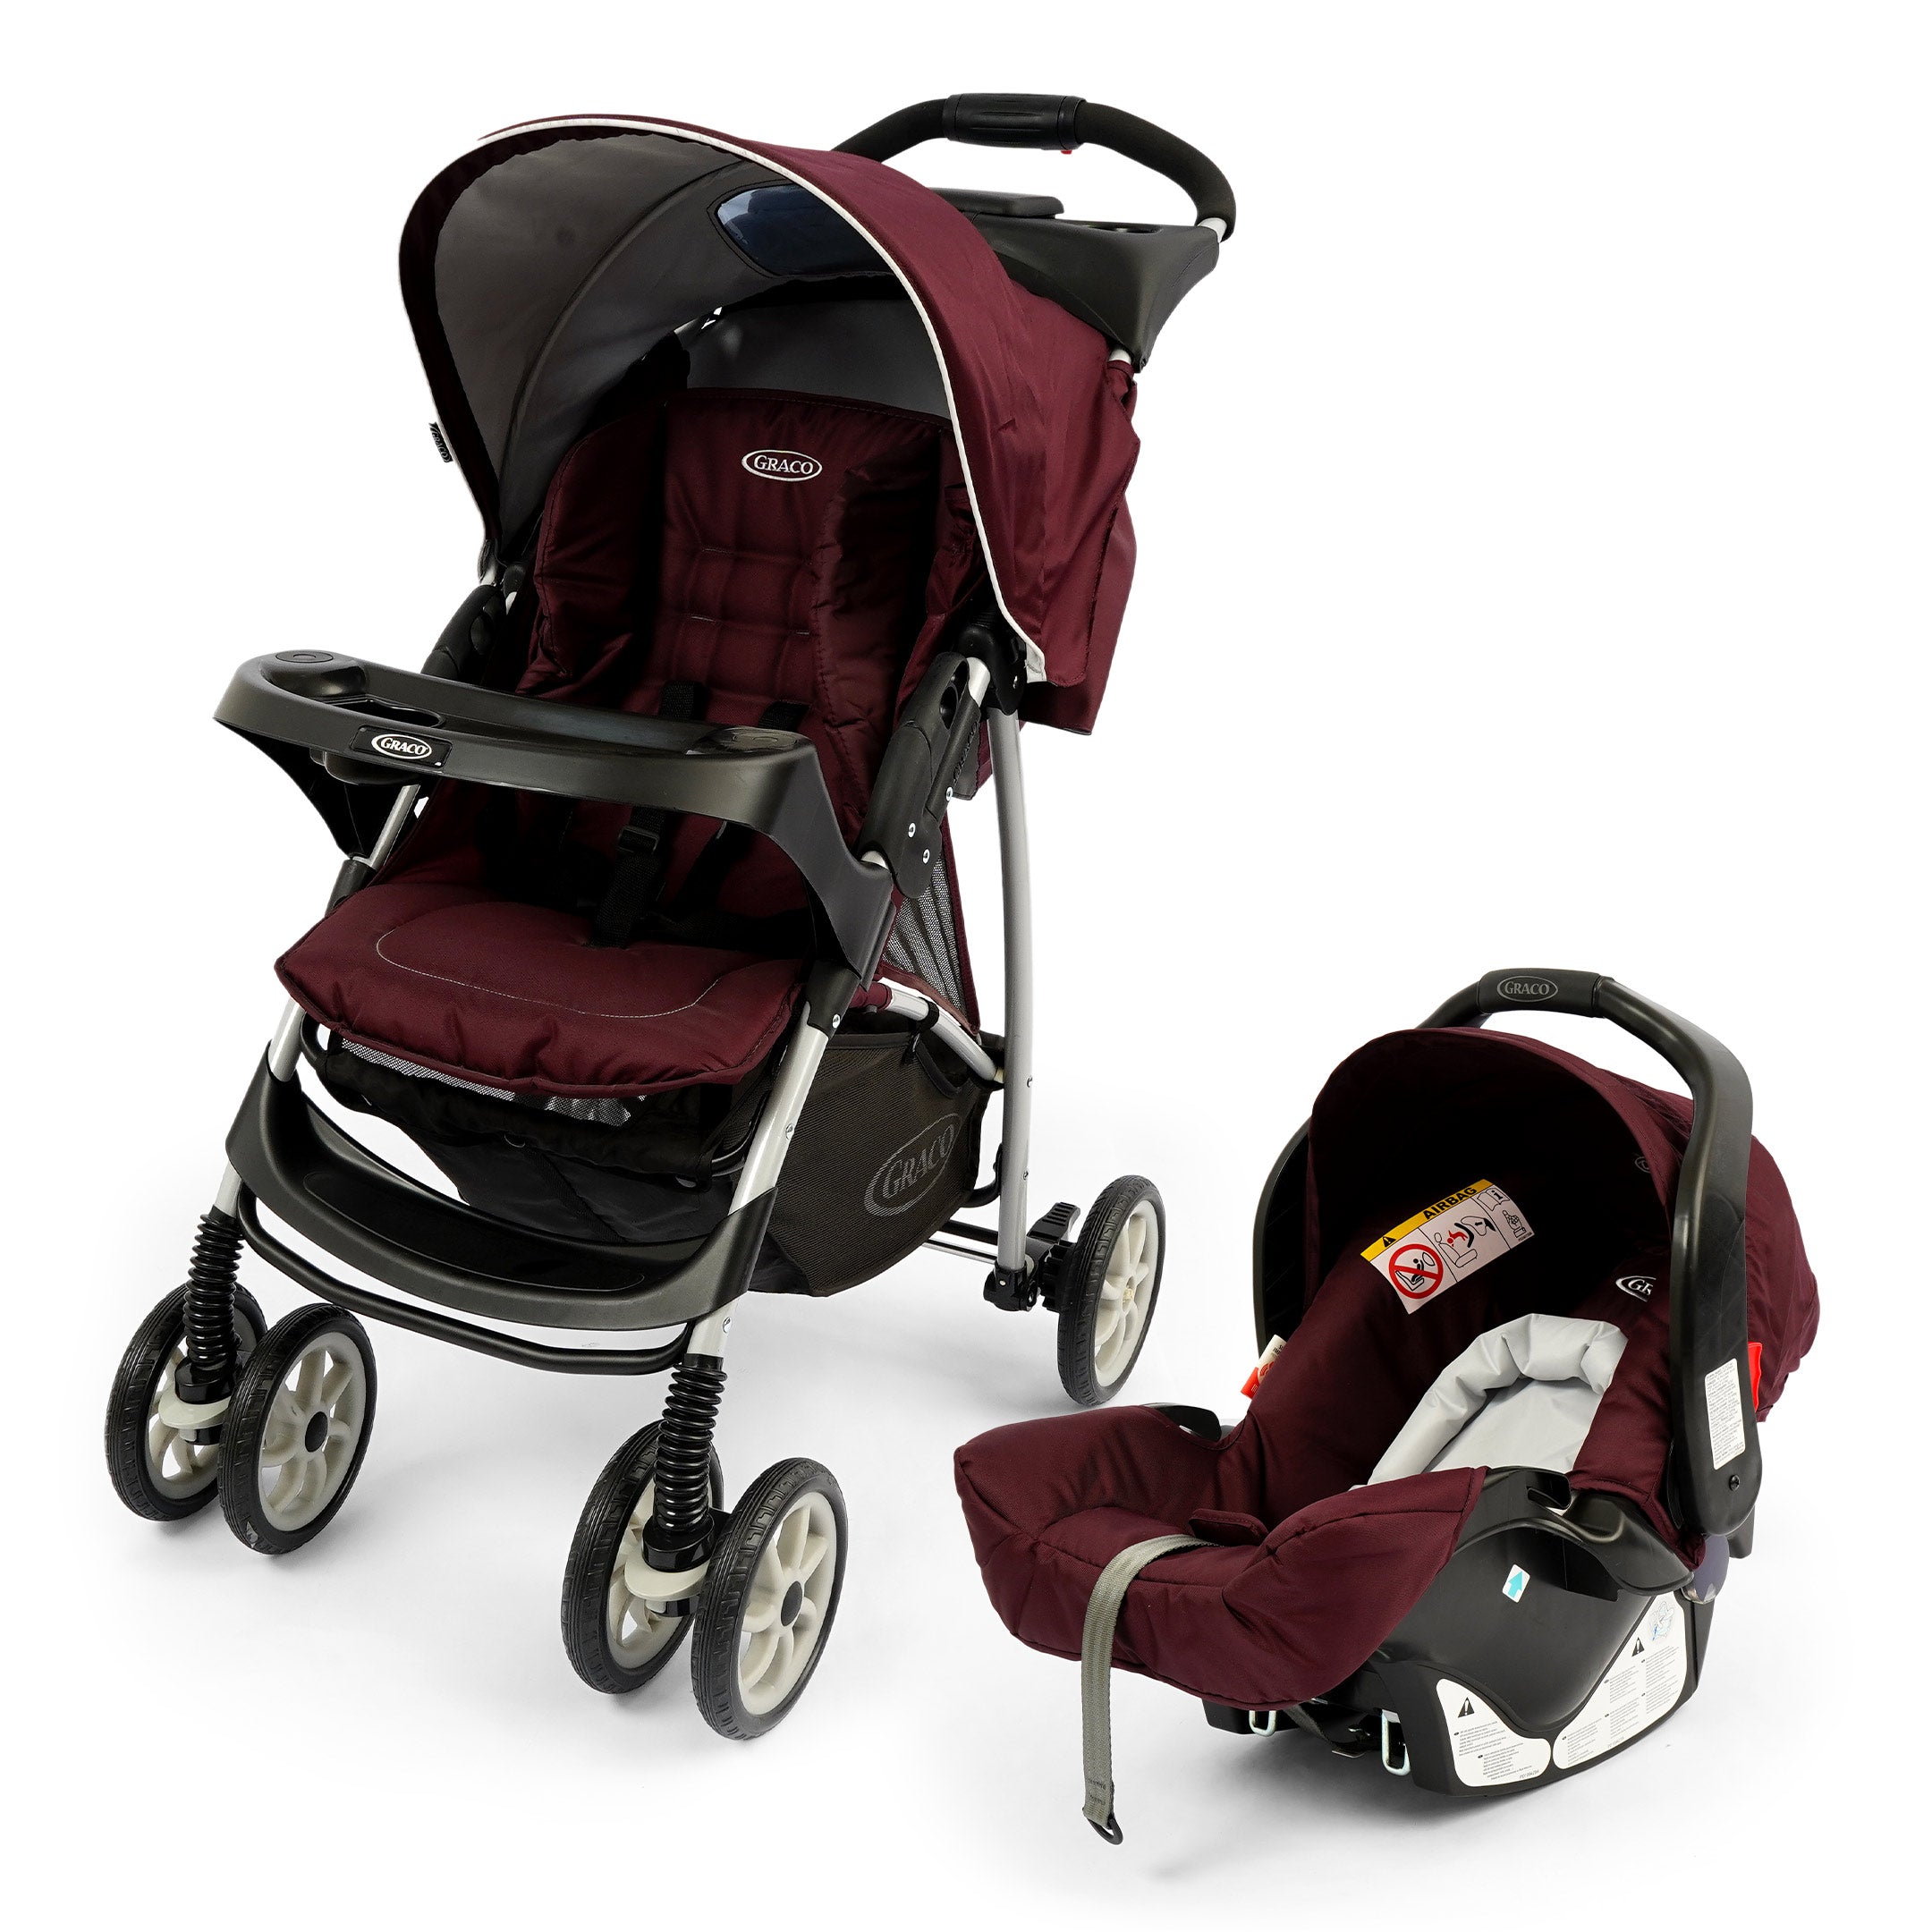 3 In 1 Graco Kids Stroller Car Seat and Carry Cot